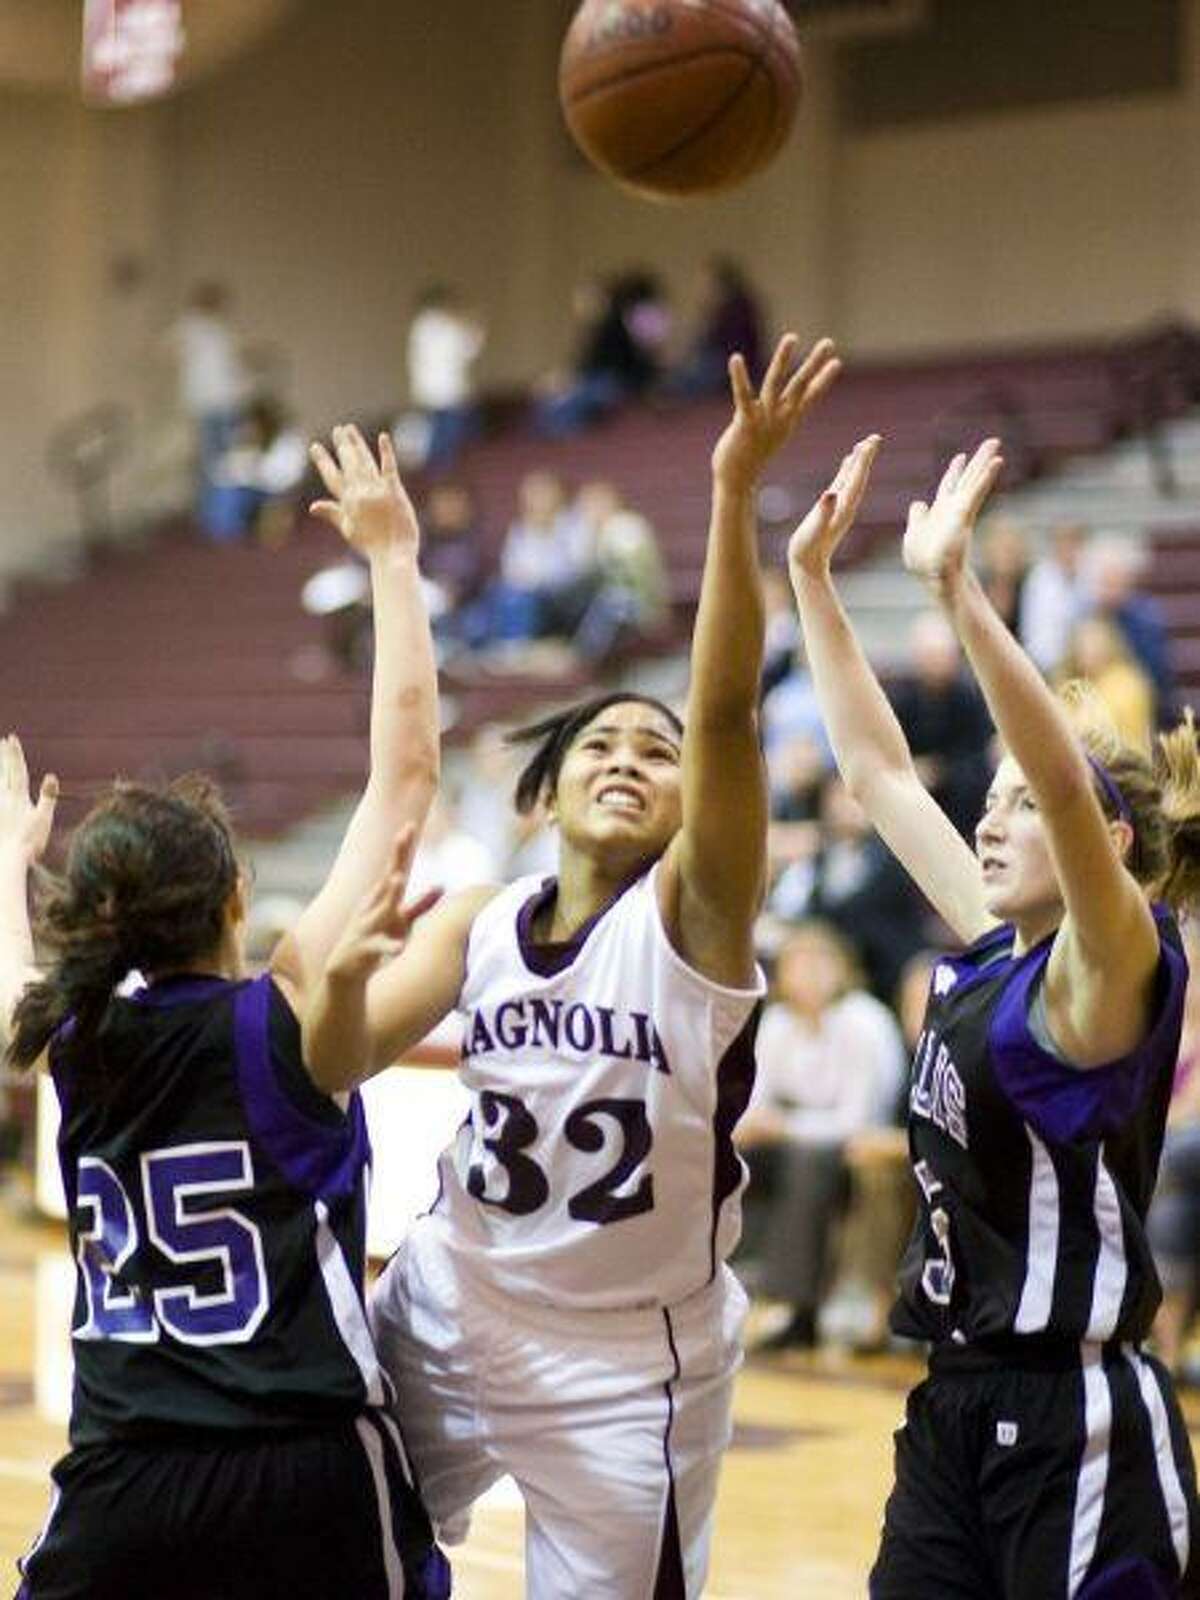 Magnolia High sophomore Shaq Fuselier was voted 2010 District 18-4A Co-Newcomer of the Year. (Edgar Salcedo/For The Potpourri)